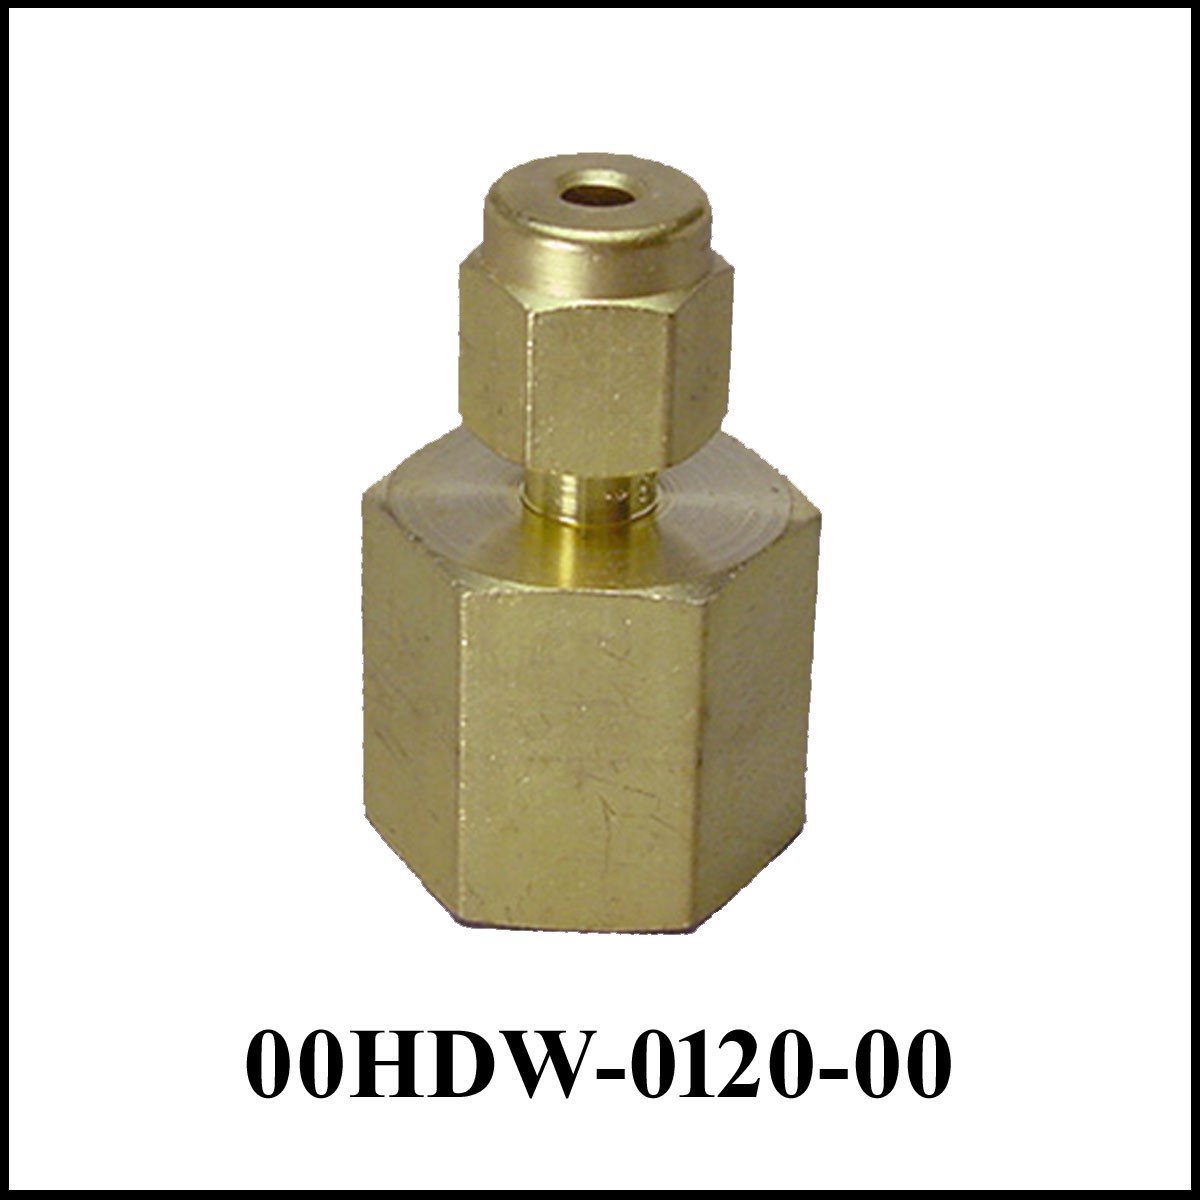 Tube Fitting 1/8 NPT-F To 1/8 Compression, Brass - MHOxygen